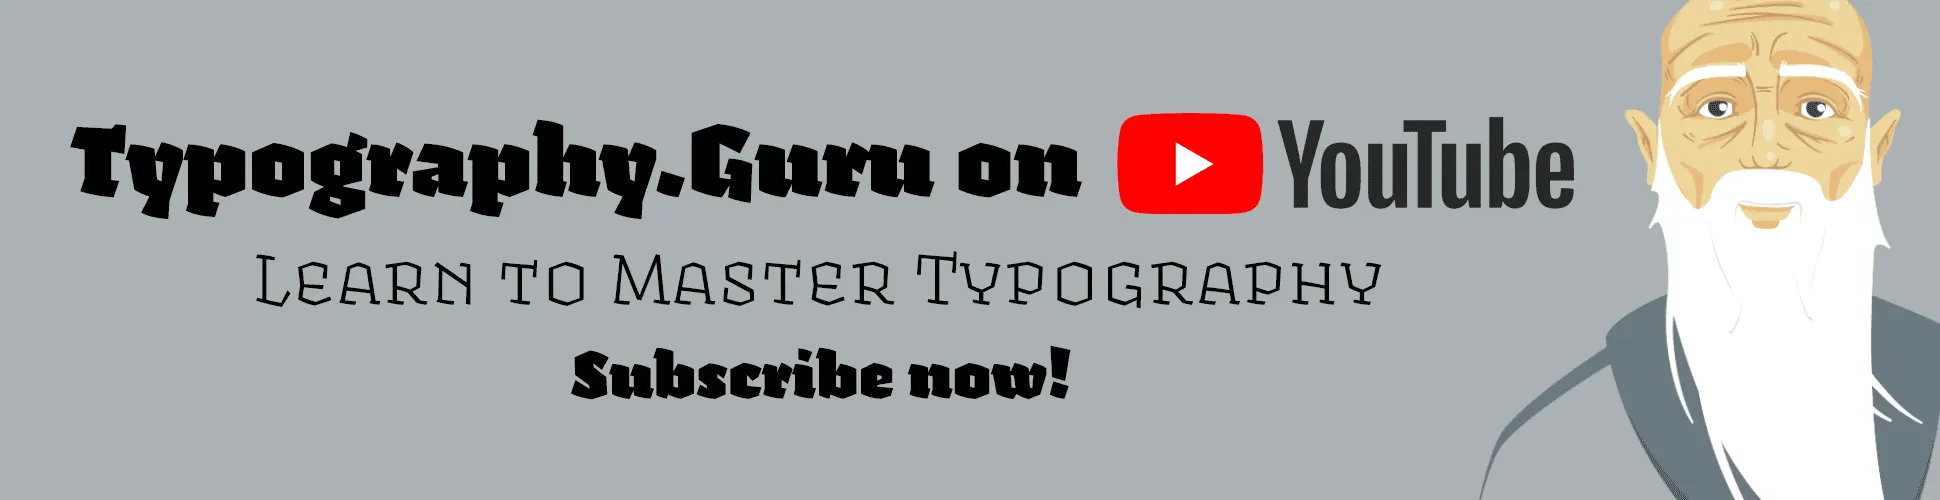 Education typography videos. Check out our YouTube channel …